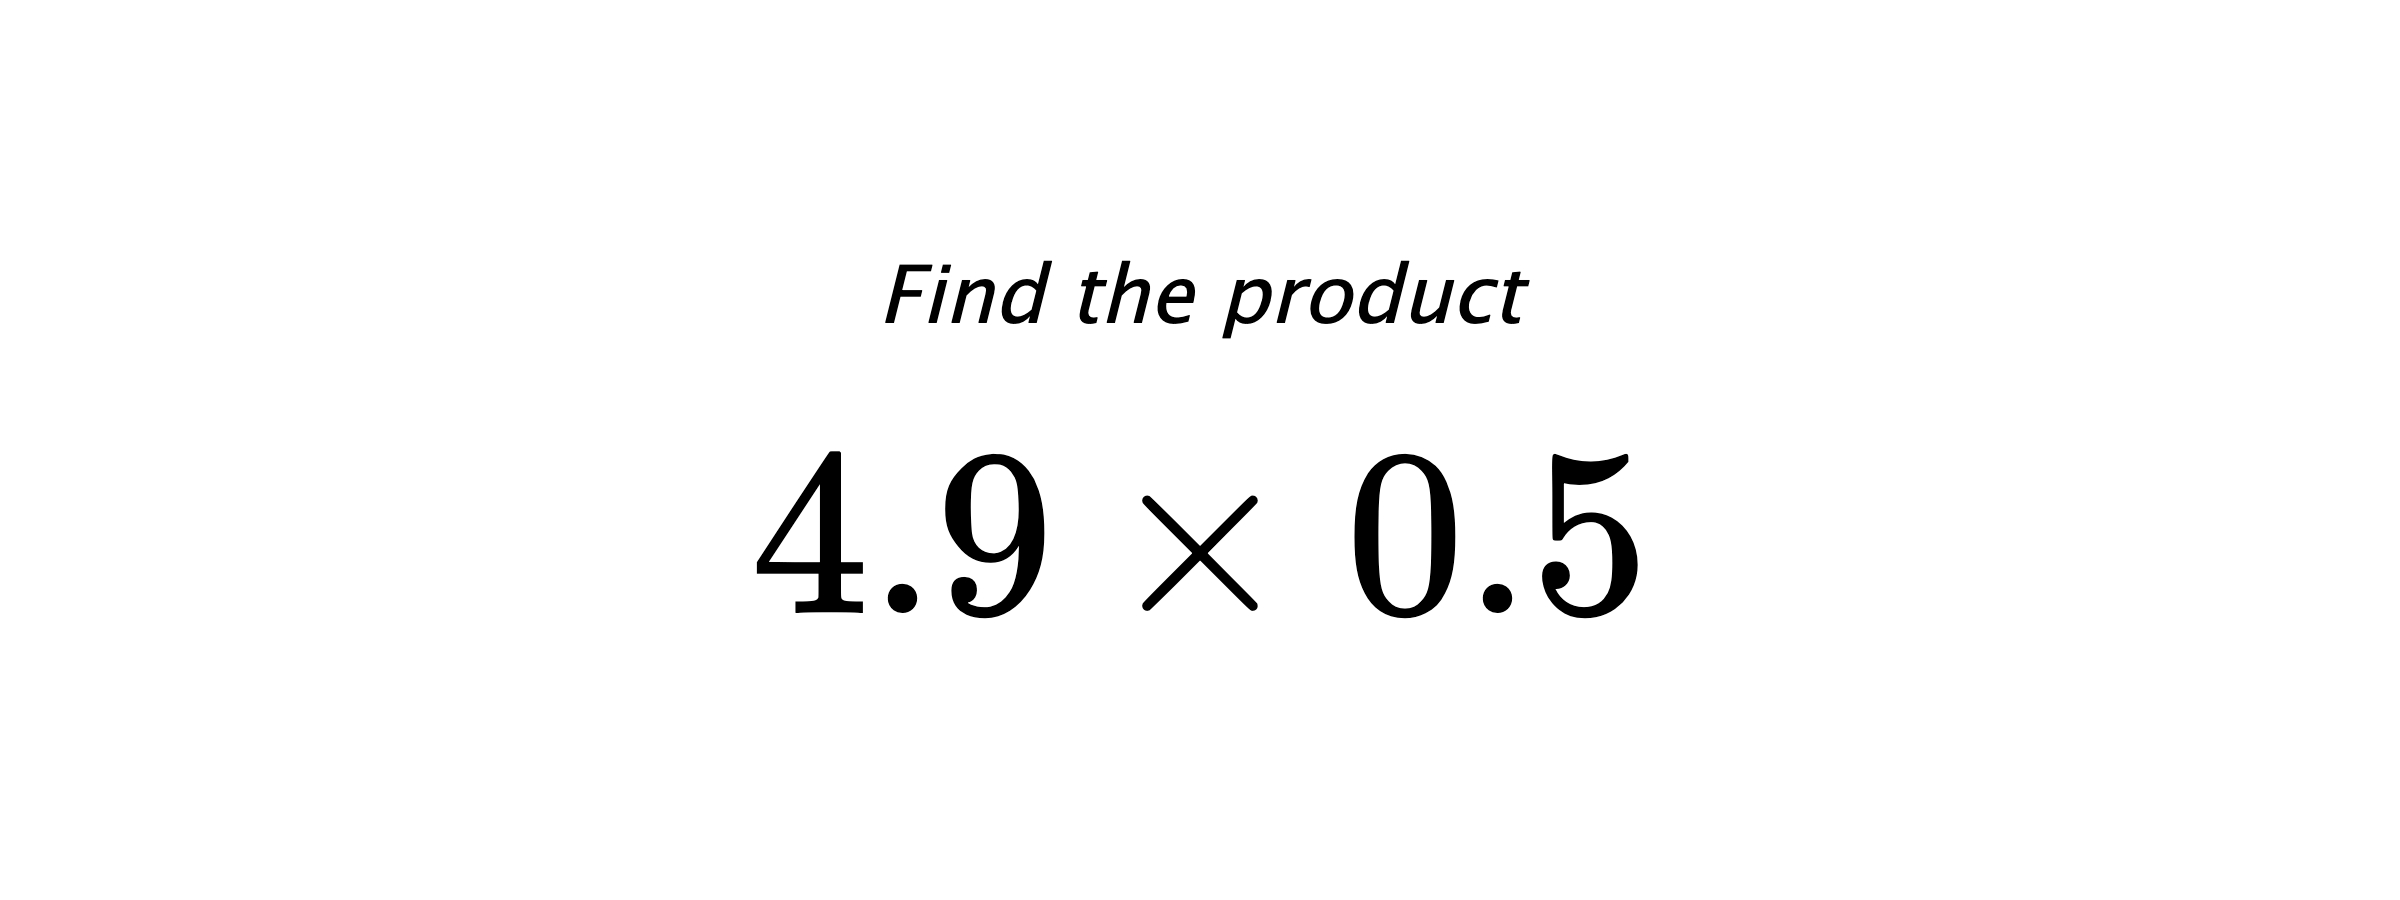 Find the product $ 4.9 \times 0.5 $